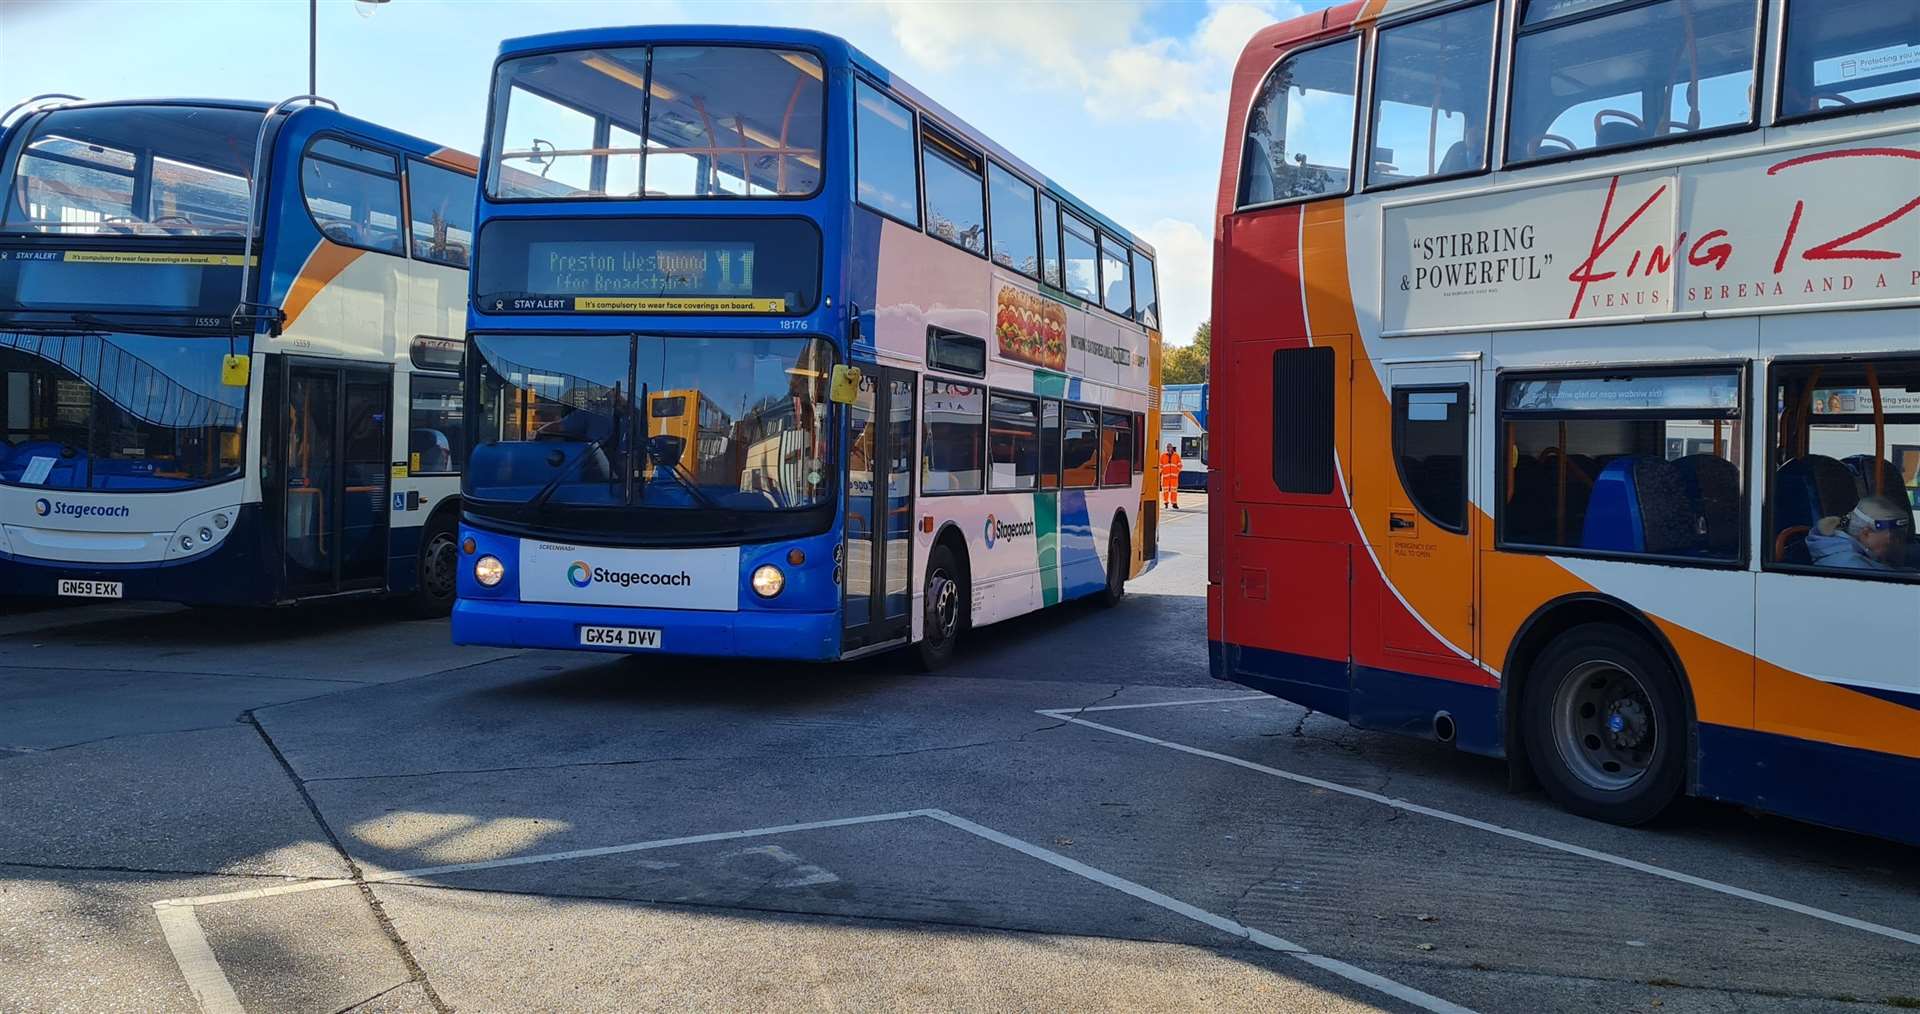 A spokesman for Stagecoach confirmed it expects its drivers to allow travel to young and vulnerable people in exceptional circumstances after dark